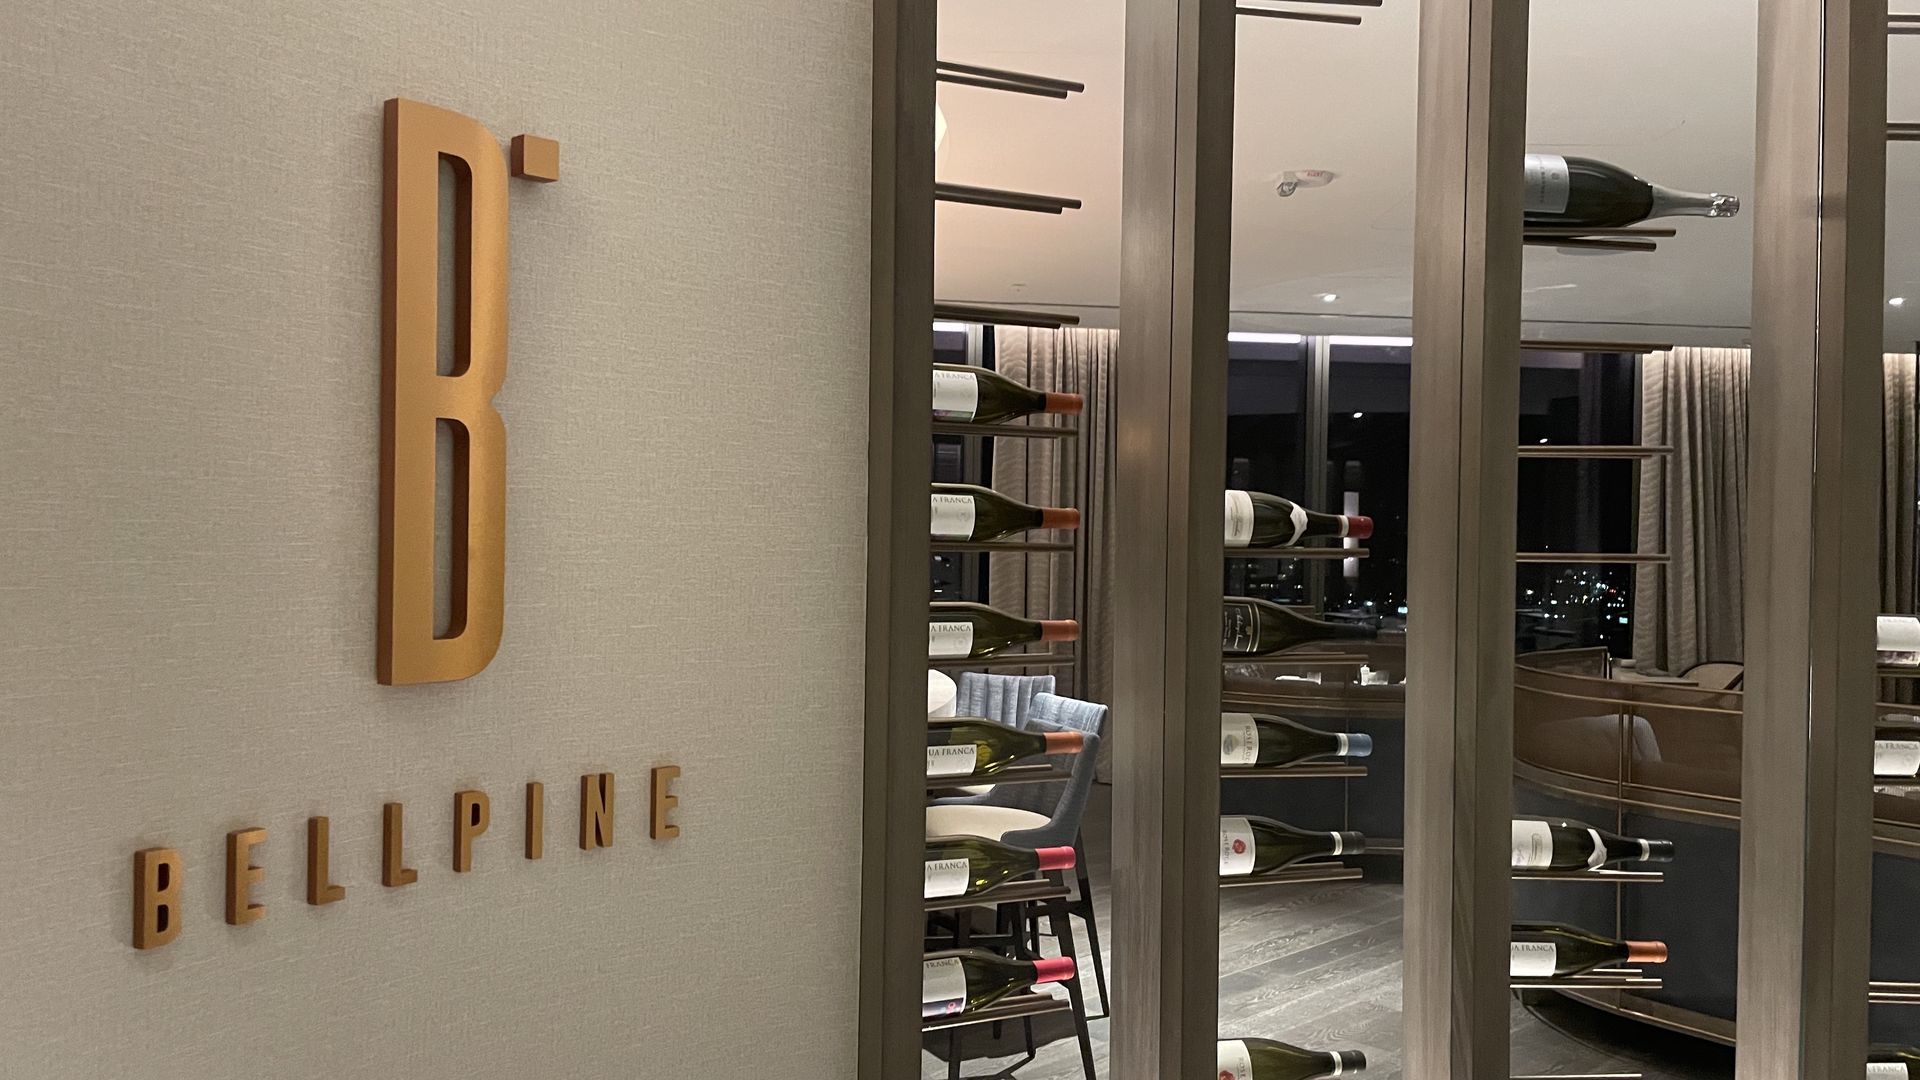 A photo of the entrance logo of the Bellpine